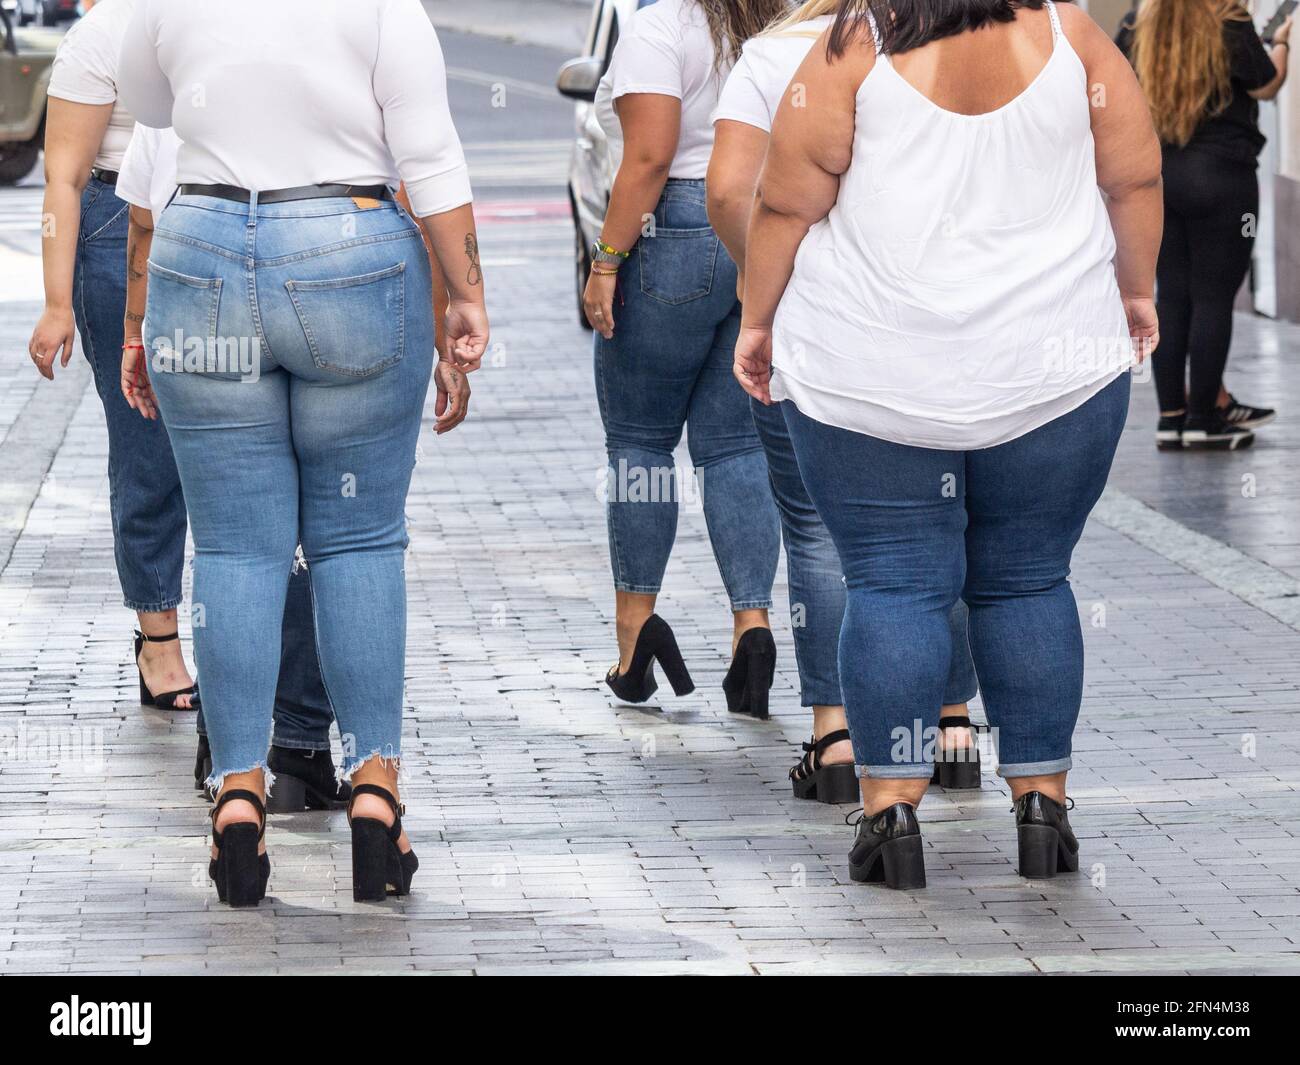 Rear view of fuller figure female models during street photo shoot in Spain Stock Photo